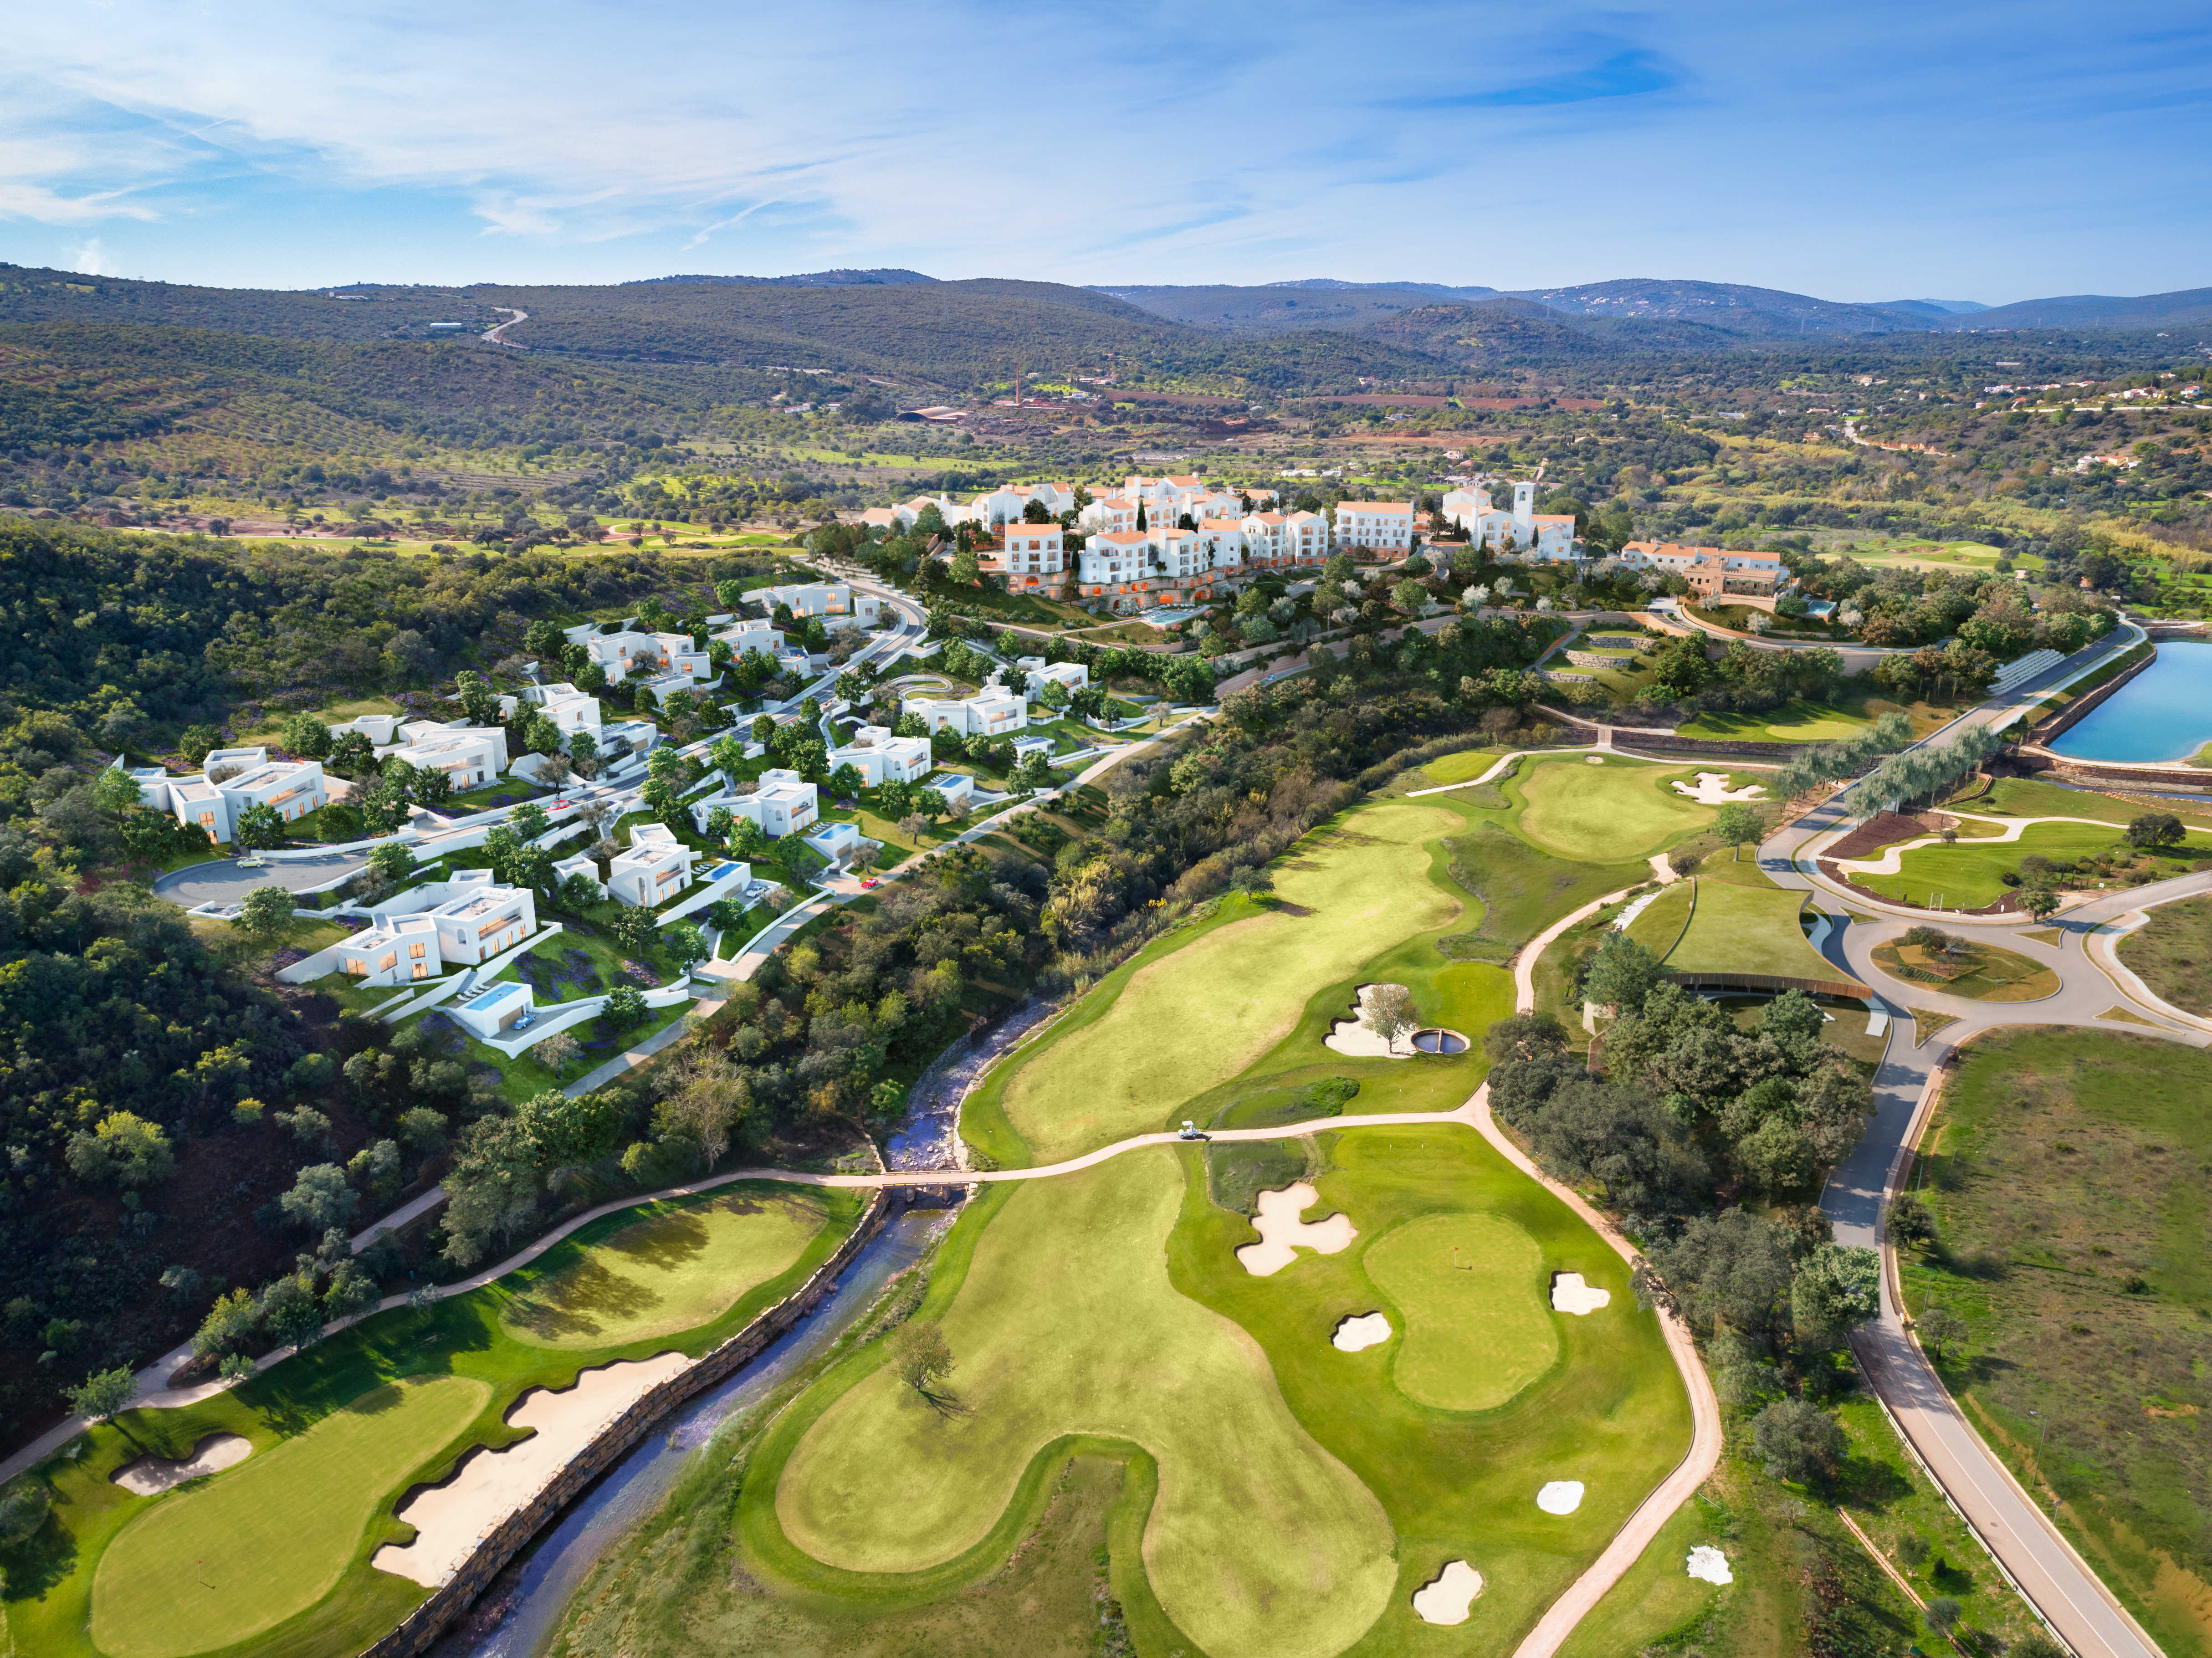 Ombria Sustainable Lifestyle Resort with an 18-hole Golf Course